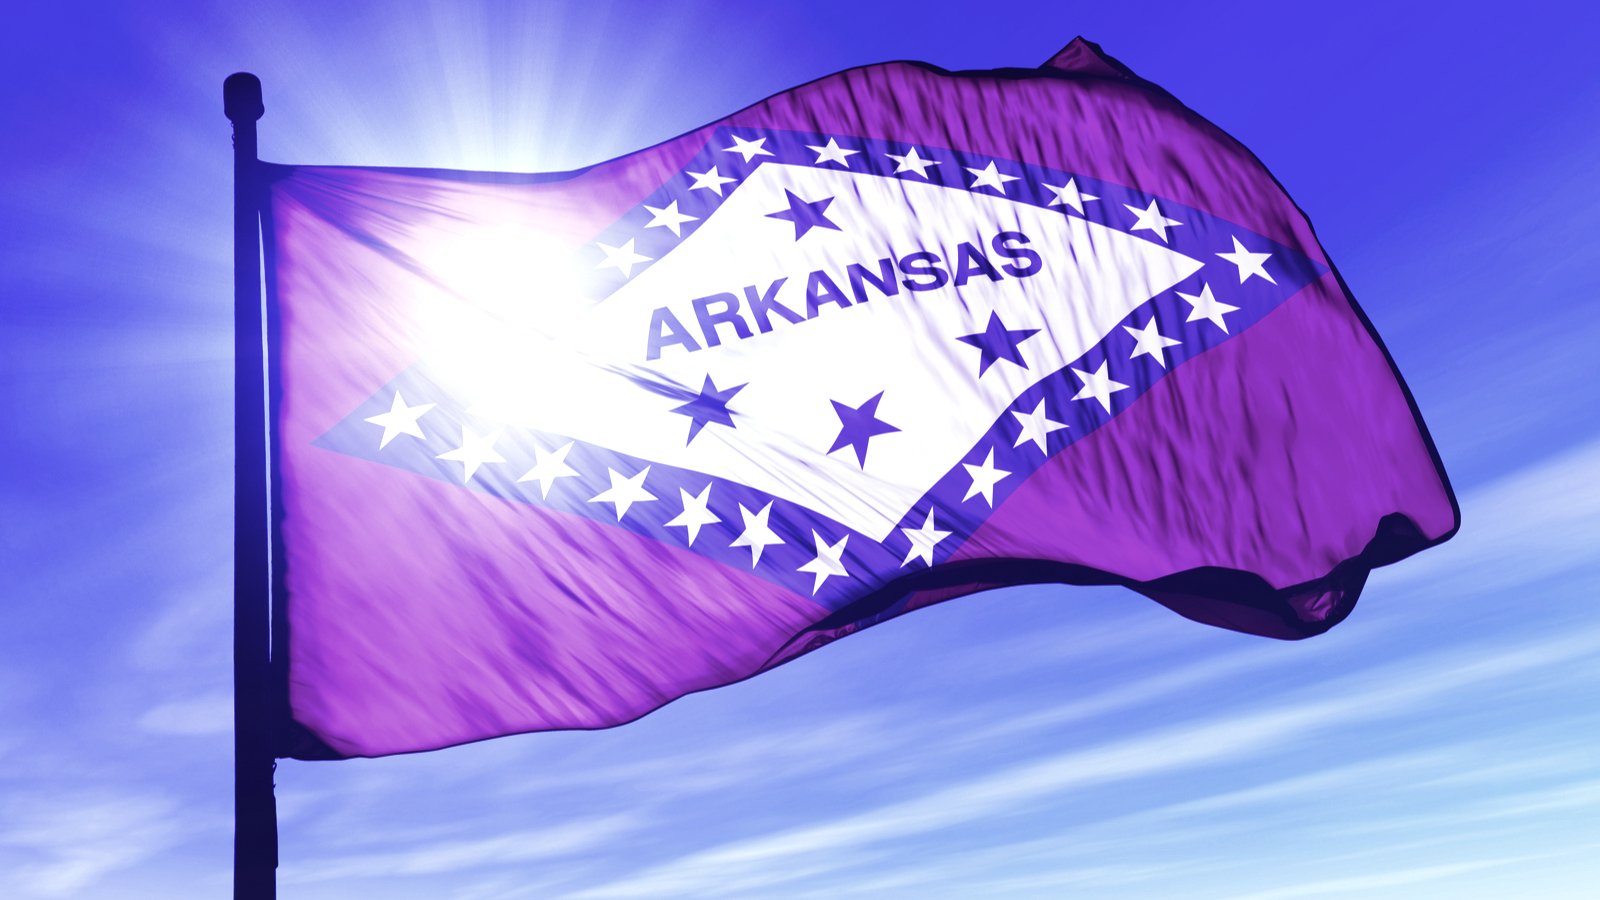 Arkansas to Lure Remote Tech Workers With ‘Bitcoin and a Bike’ Sweetener